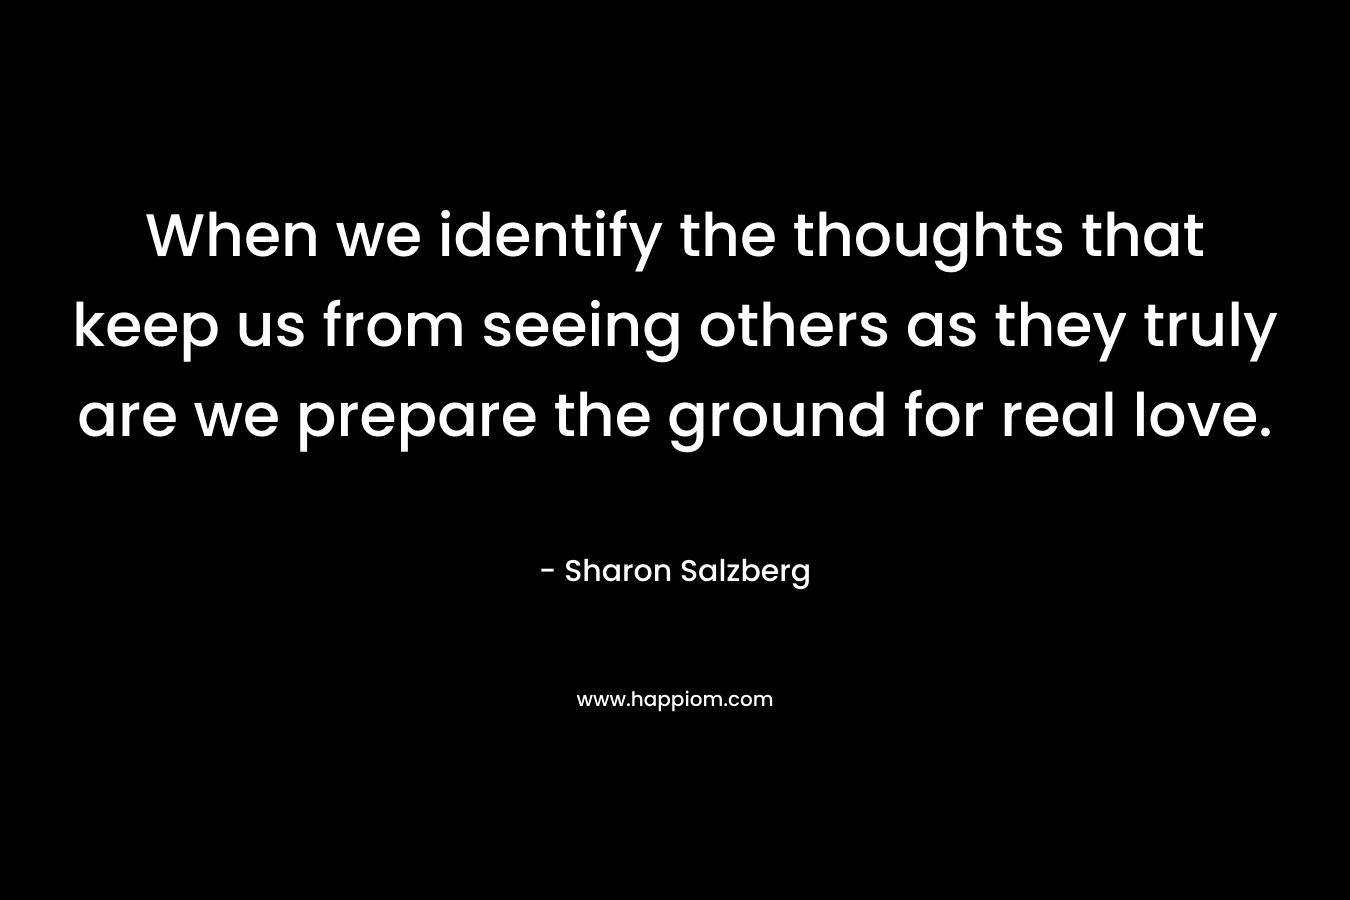 When we identify the thoughts that keep us from seeing others as they truly are we prepare the ground for real love.